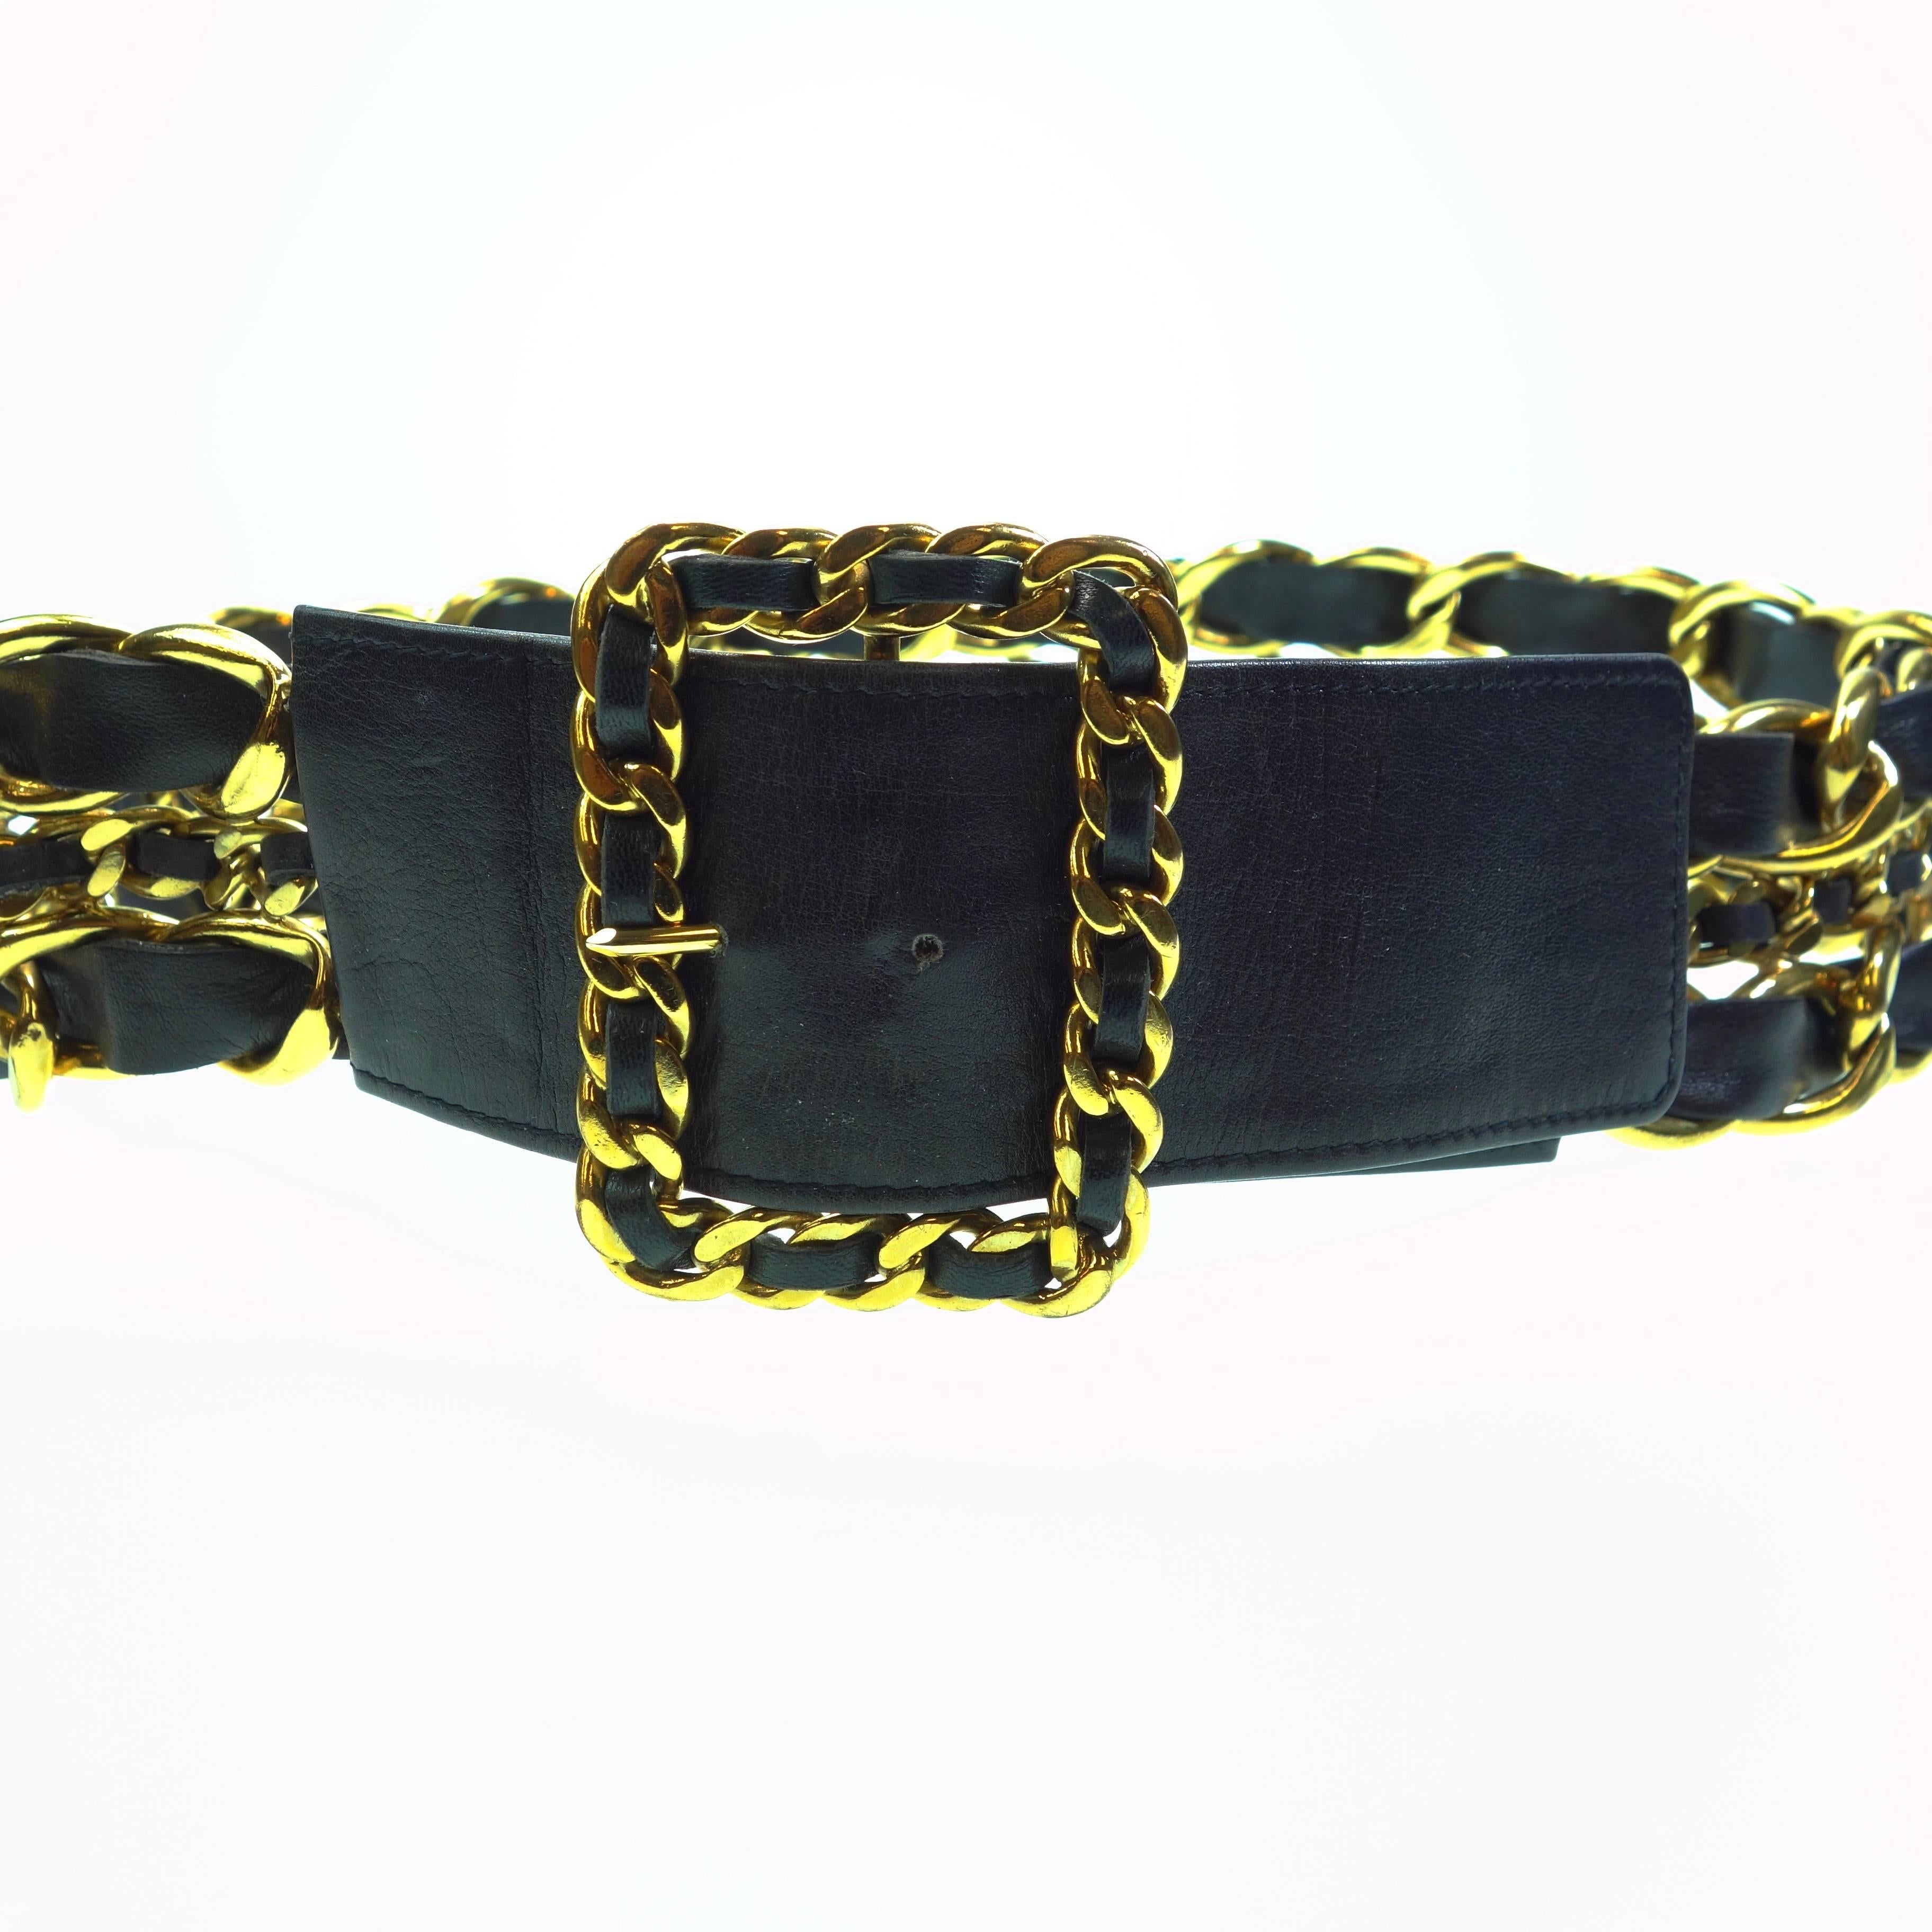 Authentic CHANEL Vintage 1989 Black and Gold Leather Woven Chain Link Belt  RARE
Size: 80/32
Made in France

Features adjustable size with 3 belt notches.

Year of Production: 1989
Color: Goldtone and black
Composition: Metal and